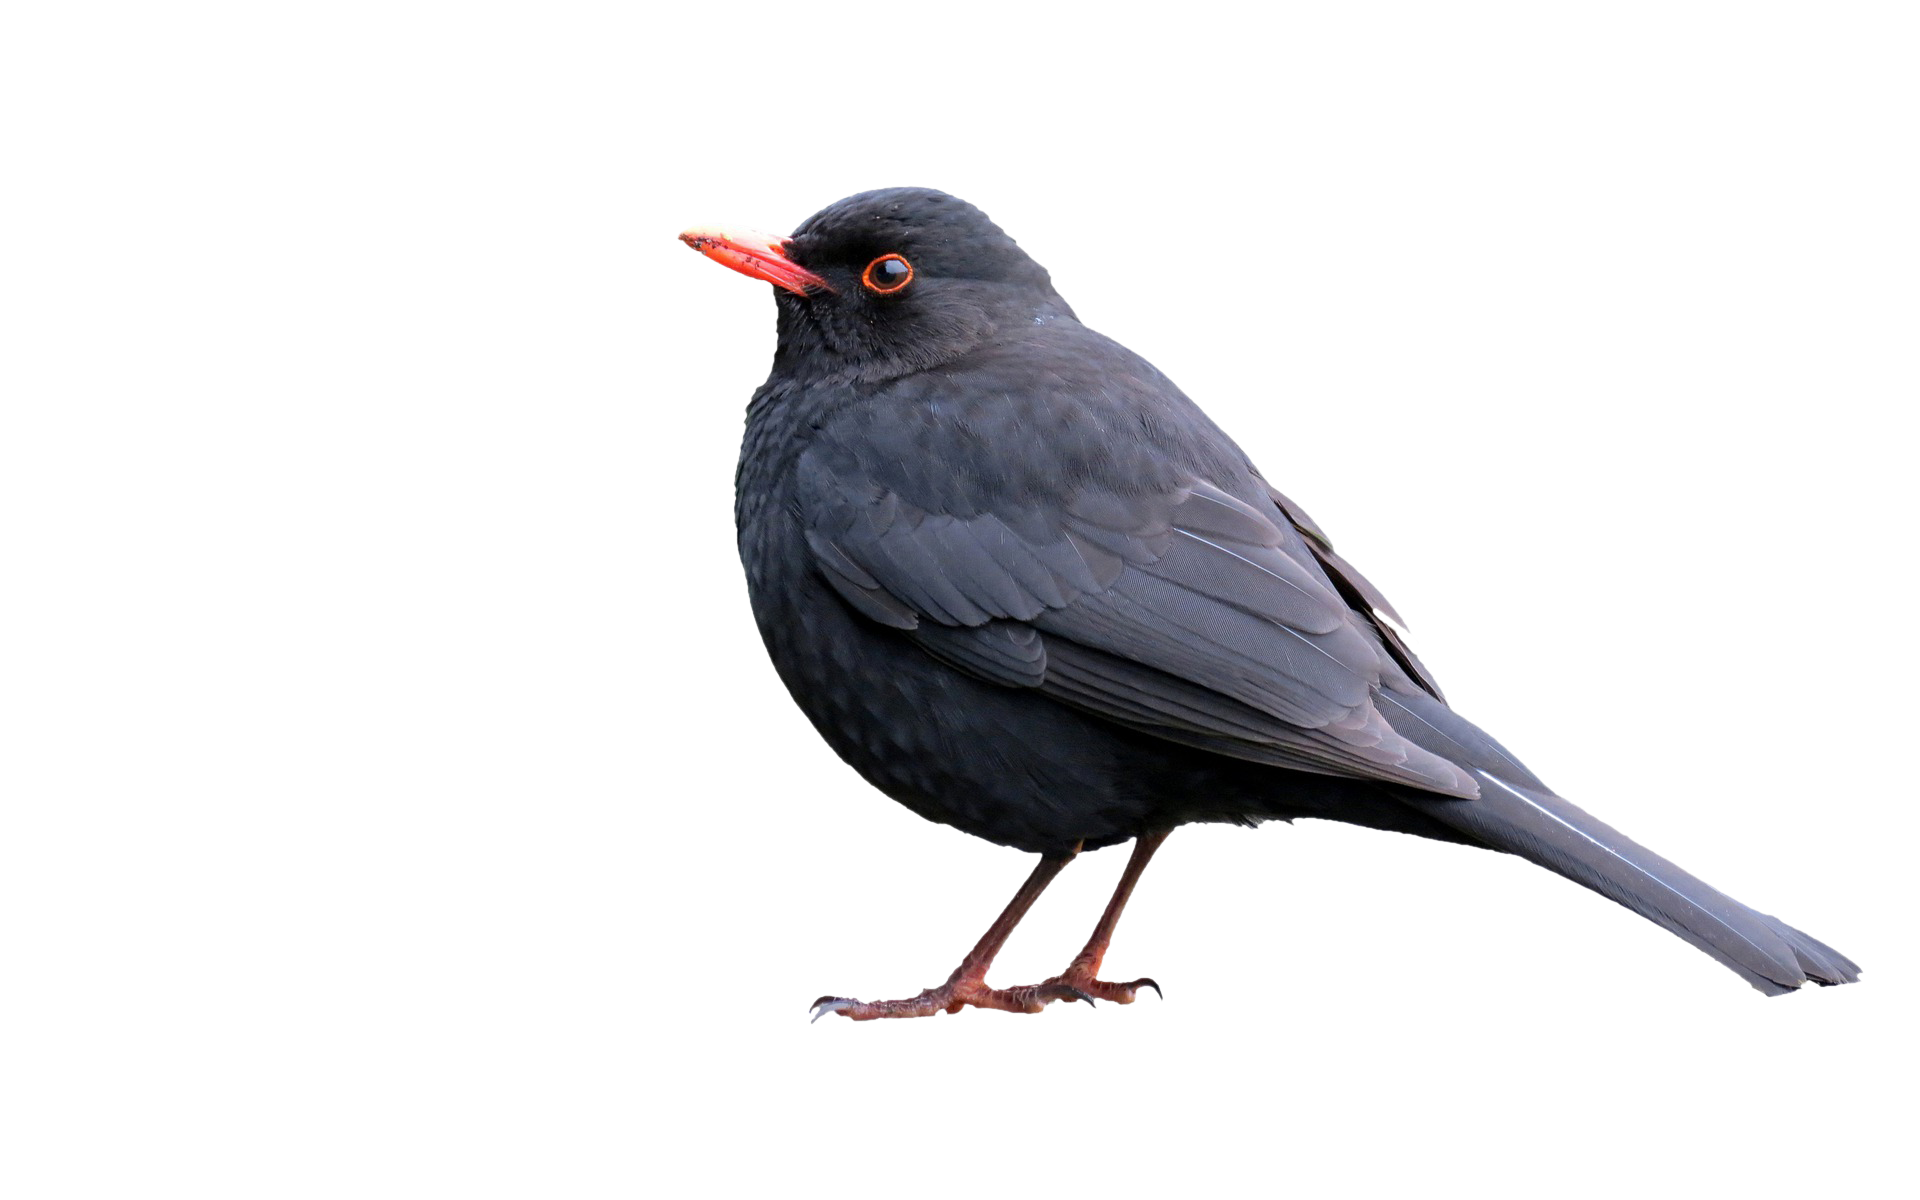 A picture of a blackbird